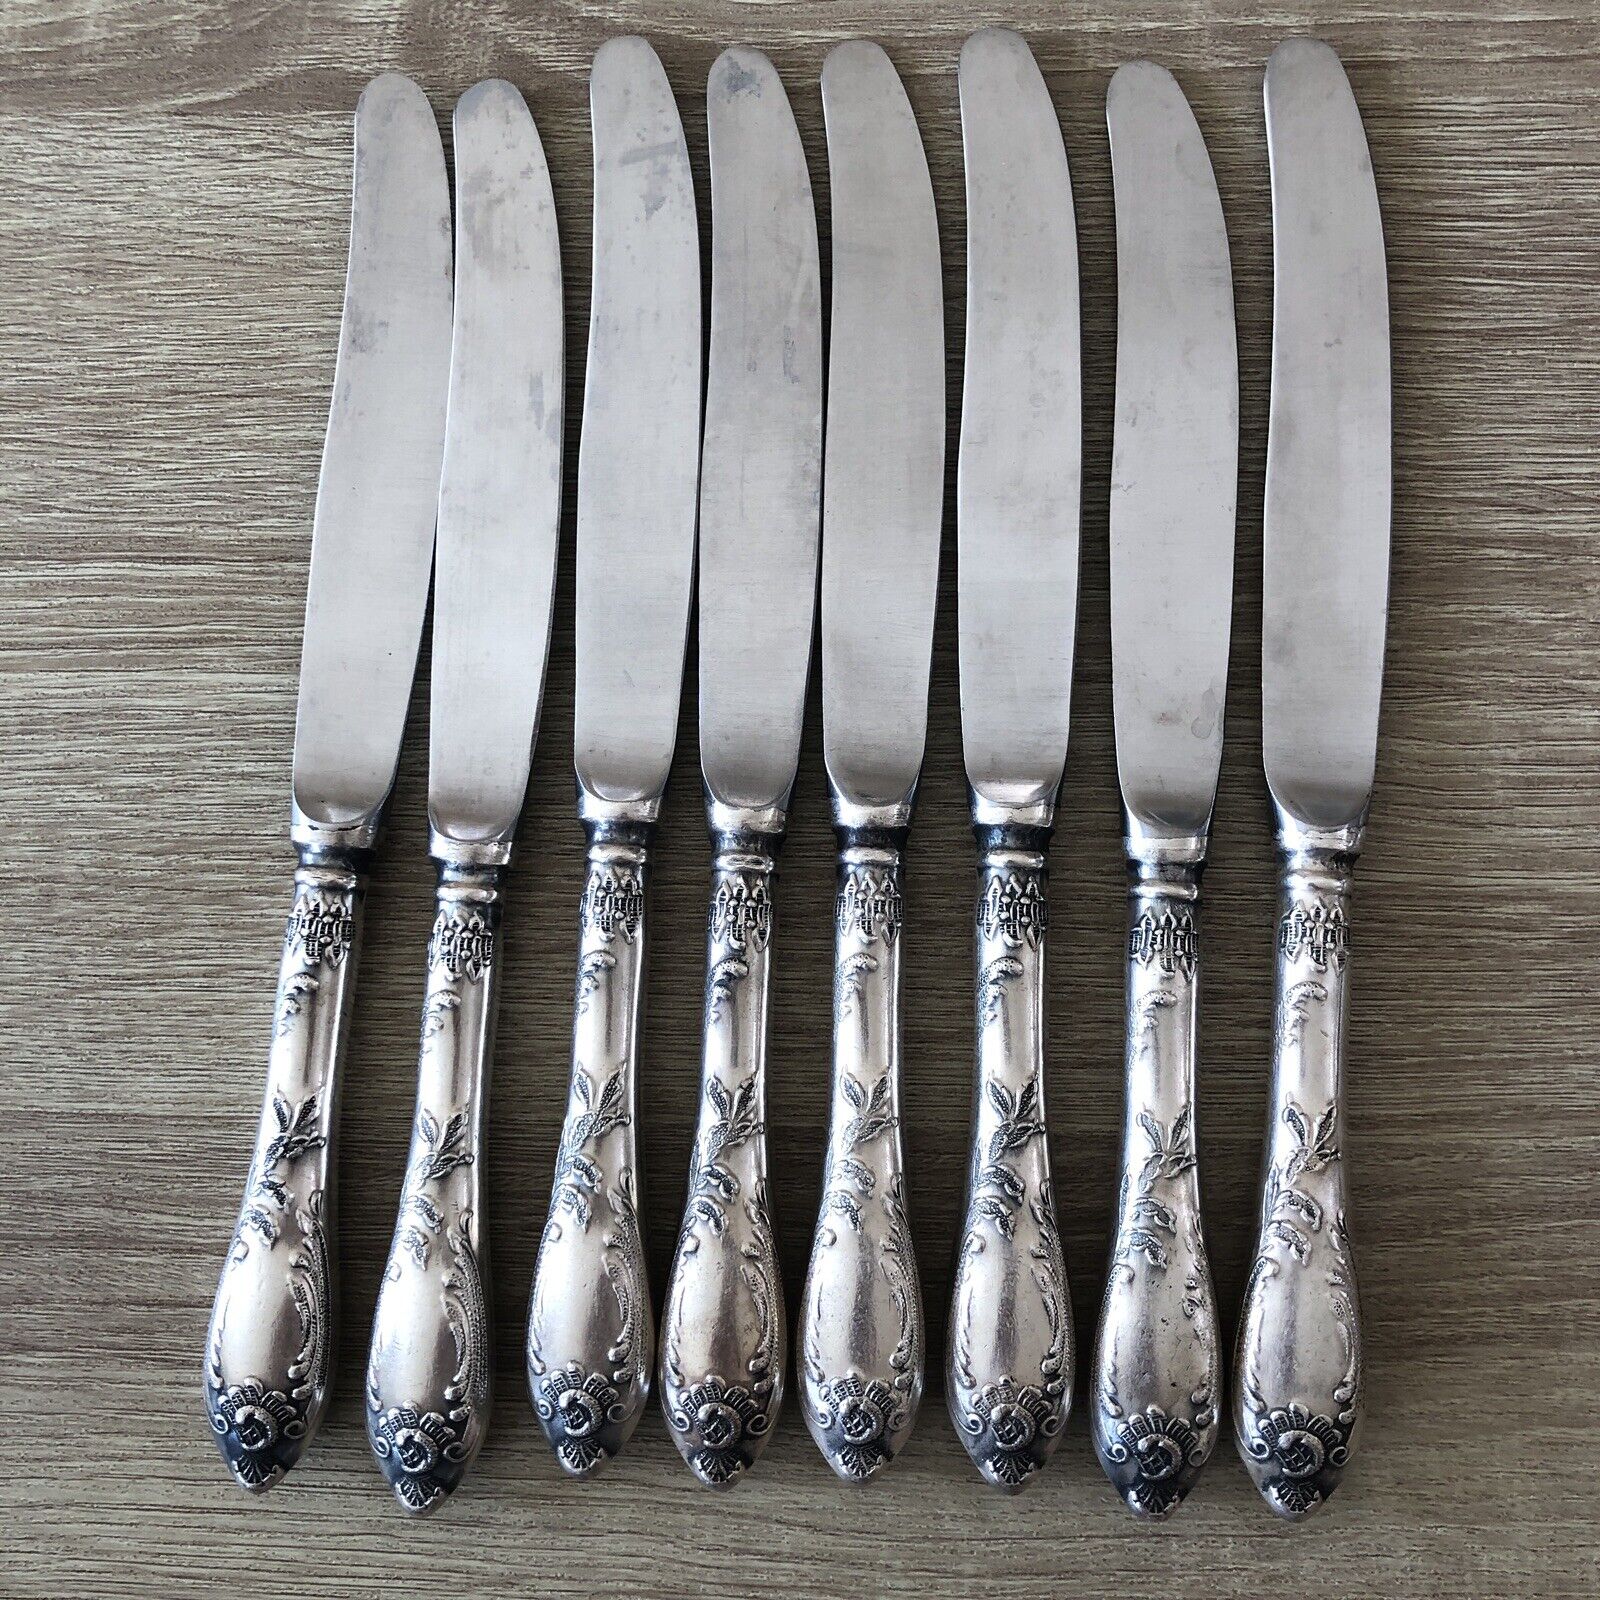 Vintage Russian USSR Melchior Silver Plated Knives Set 8 pcs 9”